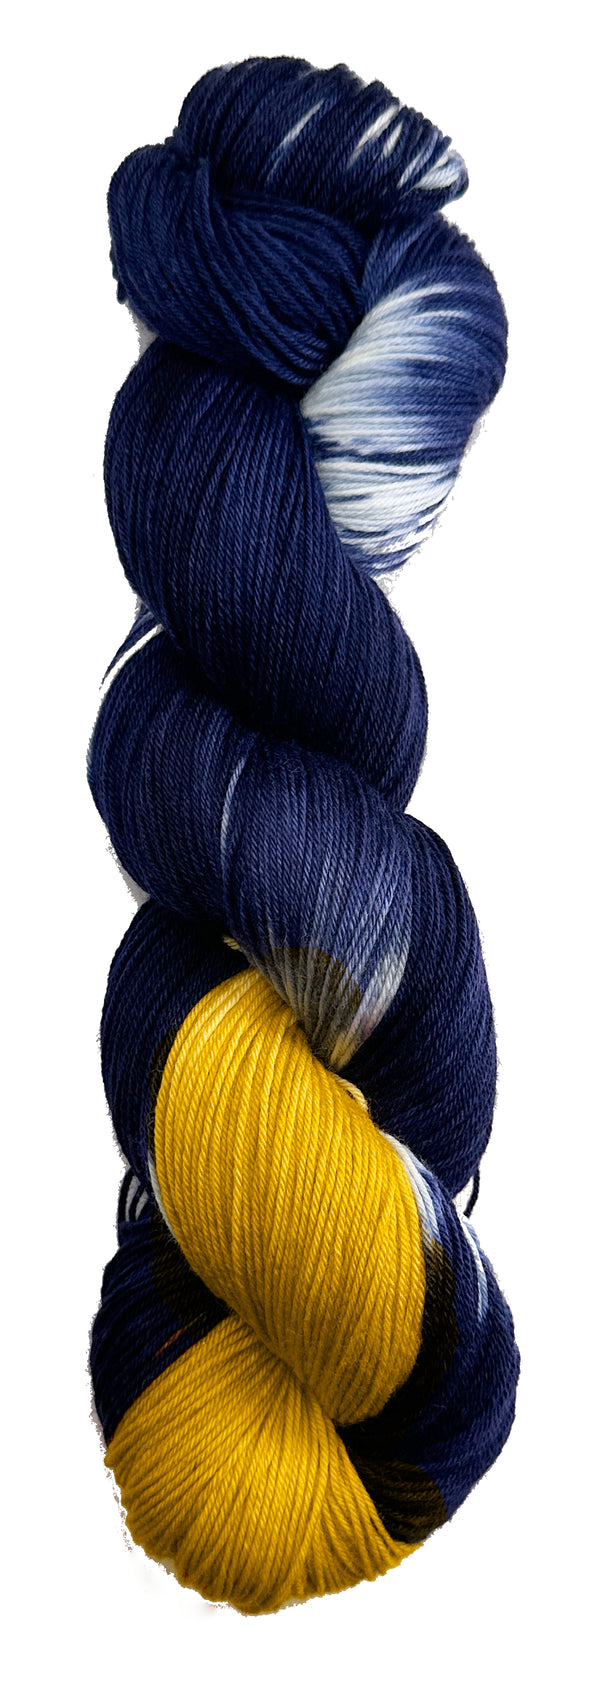 hand dyed wool yarn dark night navy blue white and gold colors. voyager 1 spacecraft themed with stars and golden record for knitting and crochet